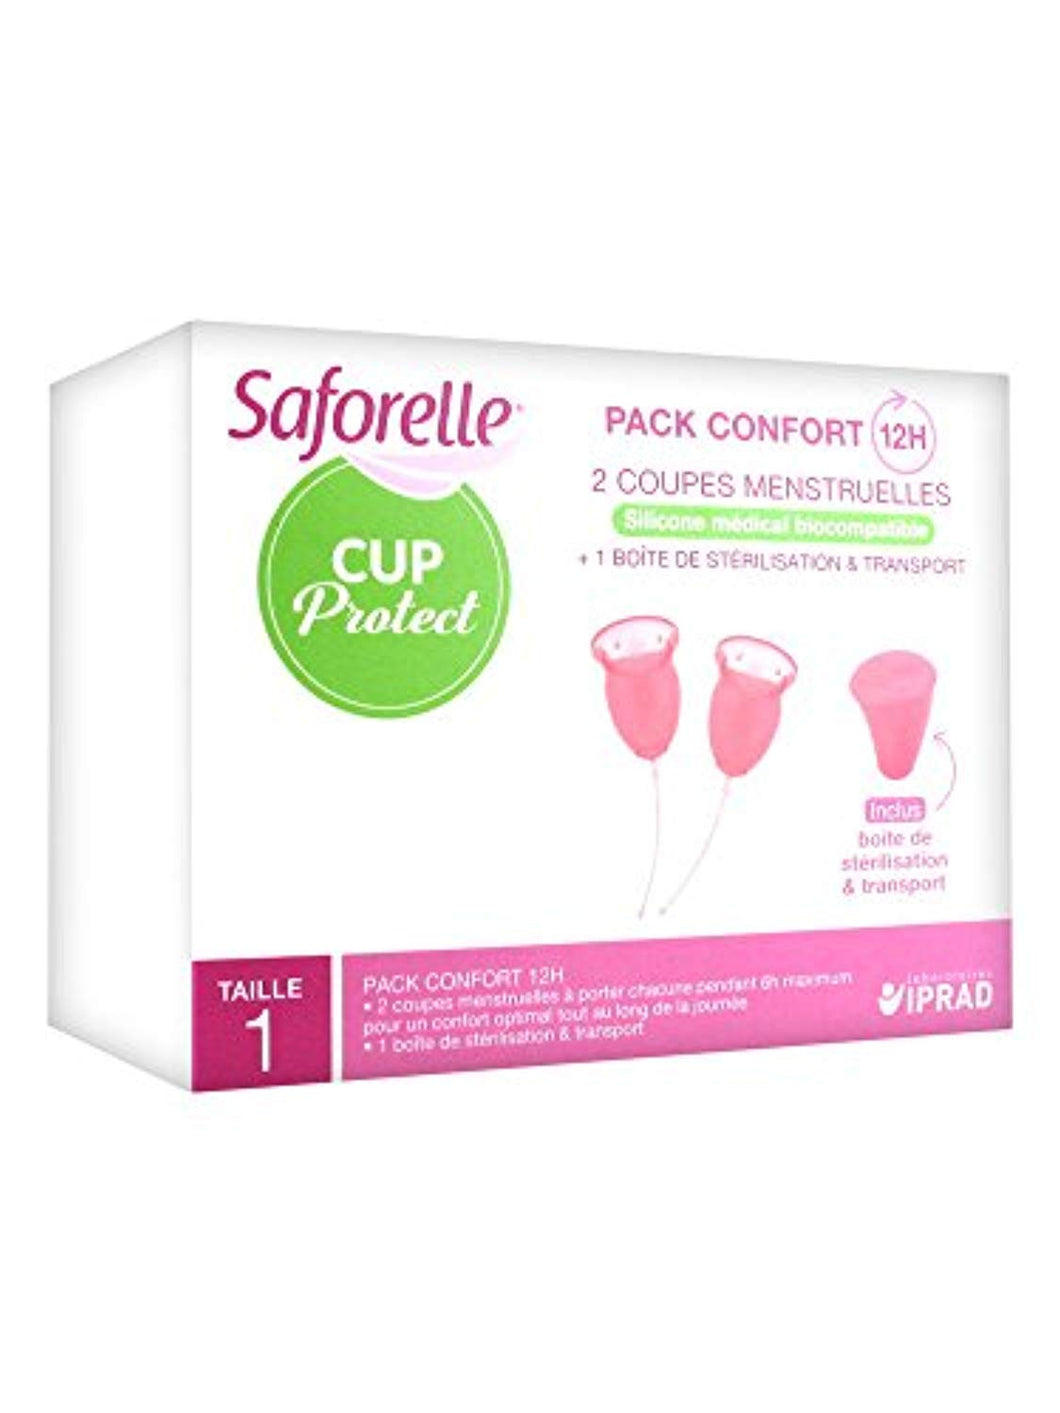 Saforelle Cup Protect 2 Coupes Menstruelles Taille 1